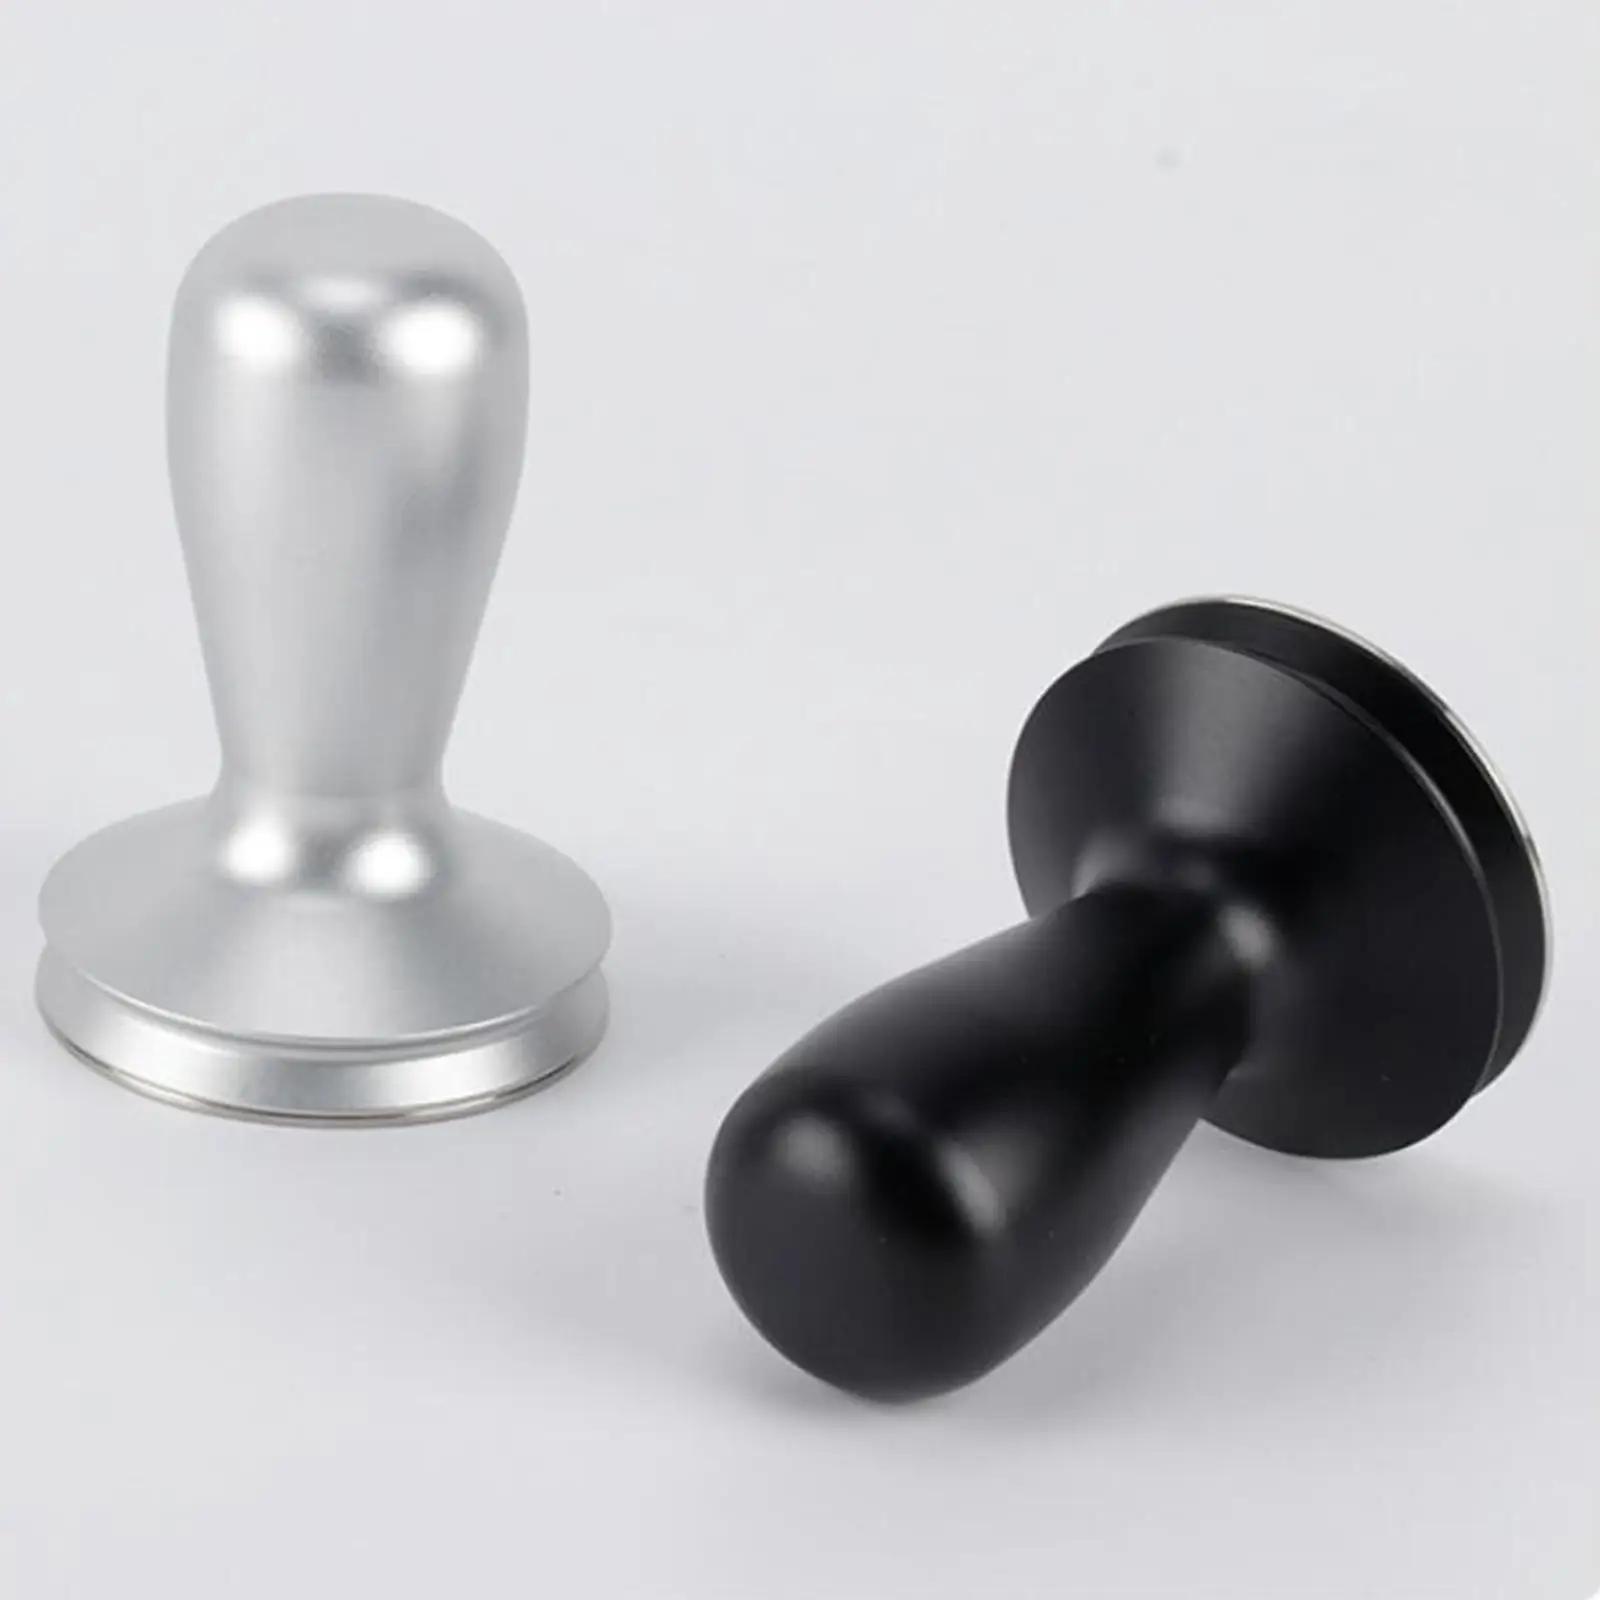 58mm Espresso Tamper Hand Tamper Coffee Bean Pressing Tool Barista Tool Professional Coffee Tamper for Shop Coffee Accessories